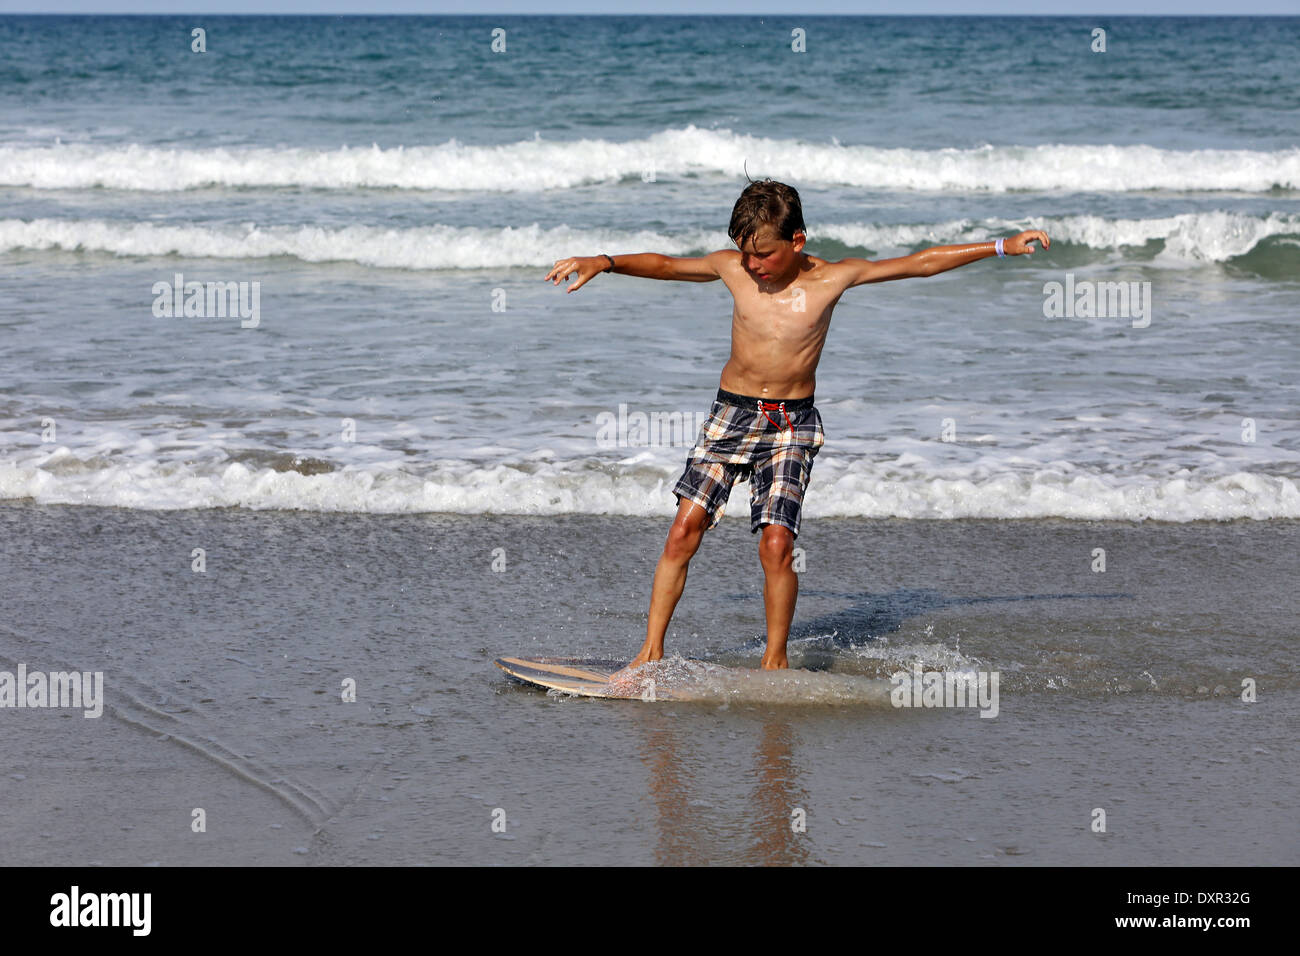 Cocoa Beach, Florida, He practices surfing at the beach Stock Photo